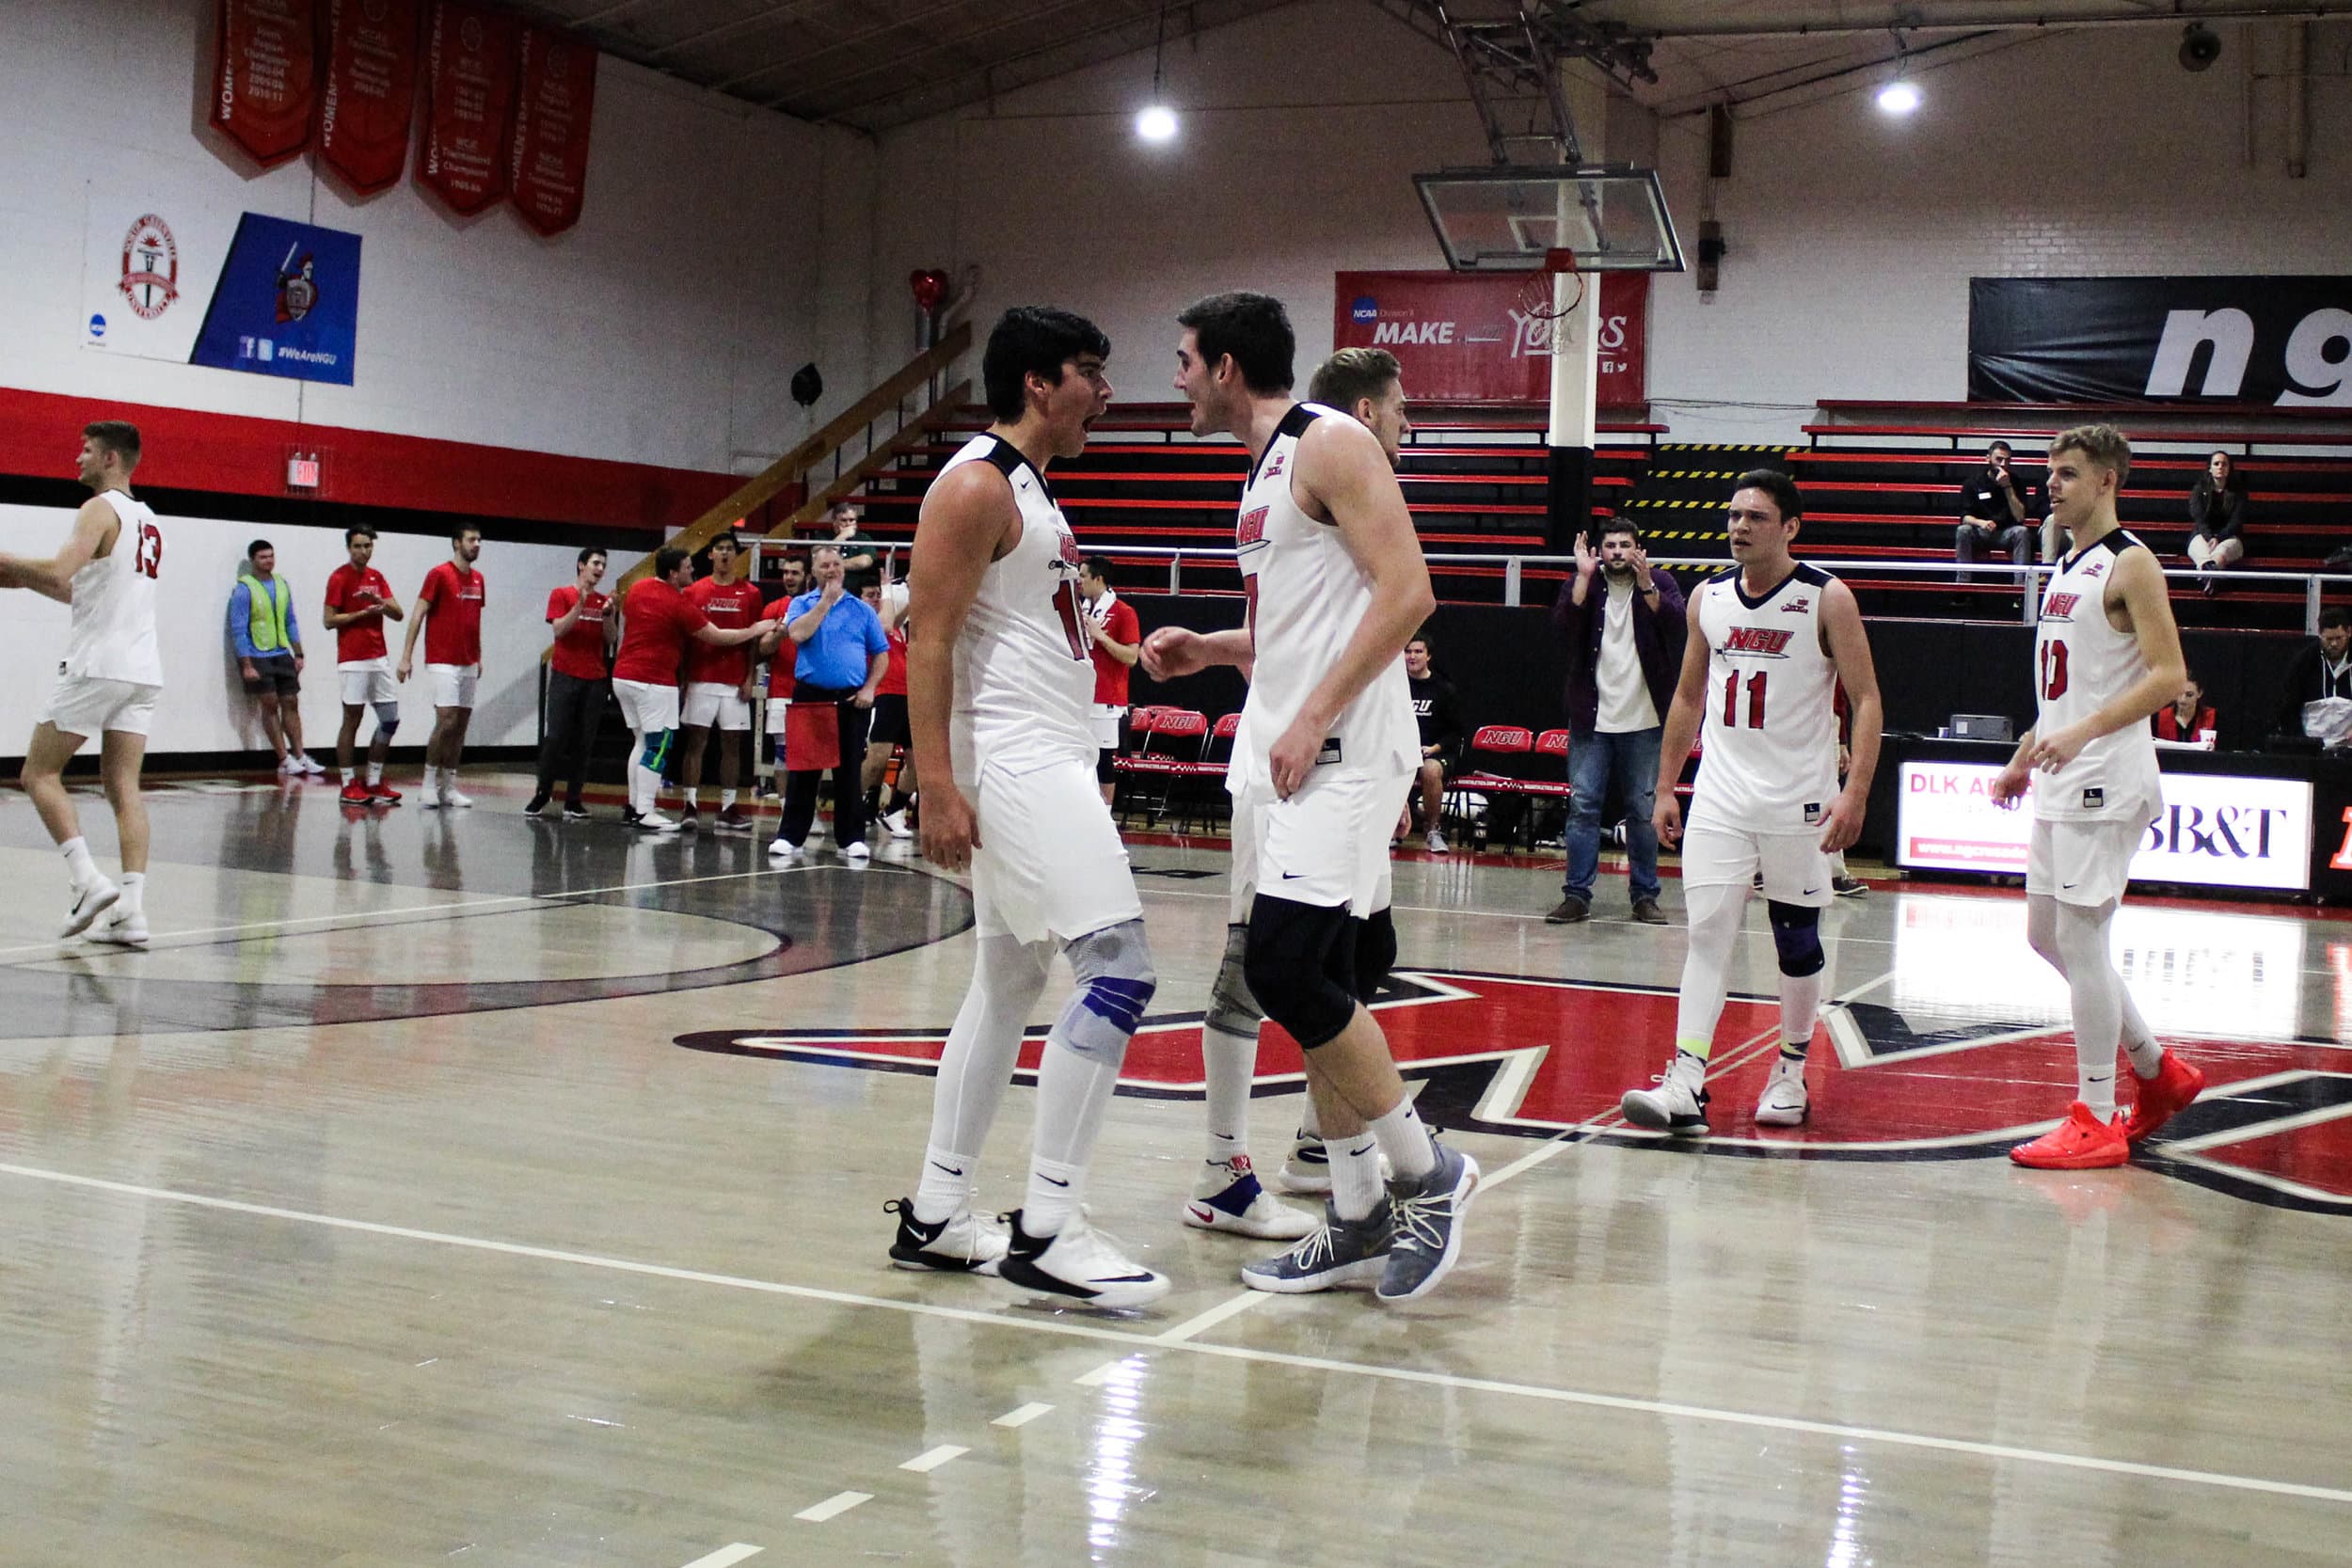 Freshman Sergio Carrillo (16) and junior Jackson Gilbert (7) celebrate together after Carrillo scored a point for the team.